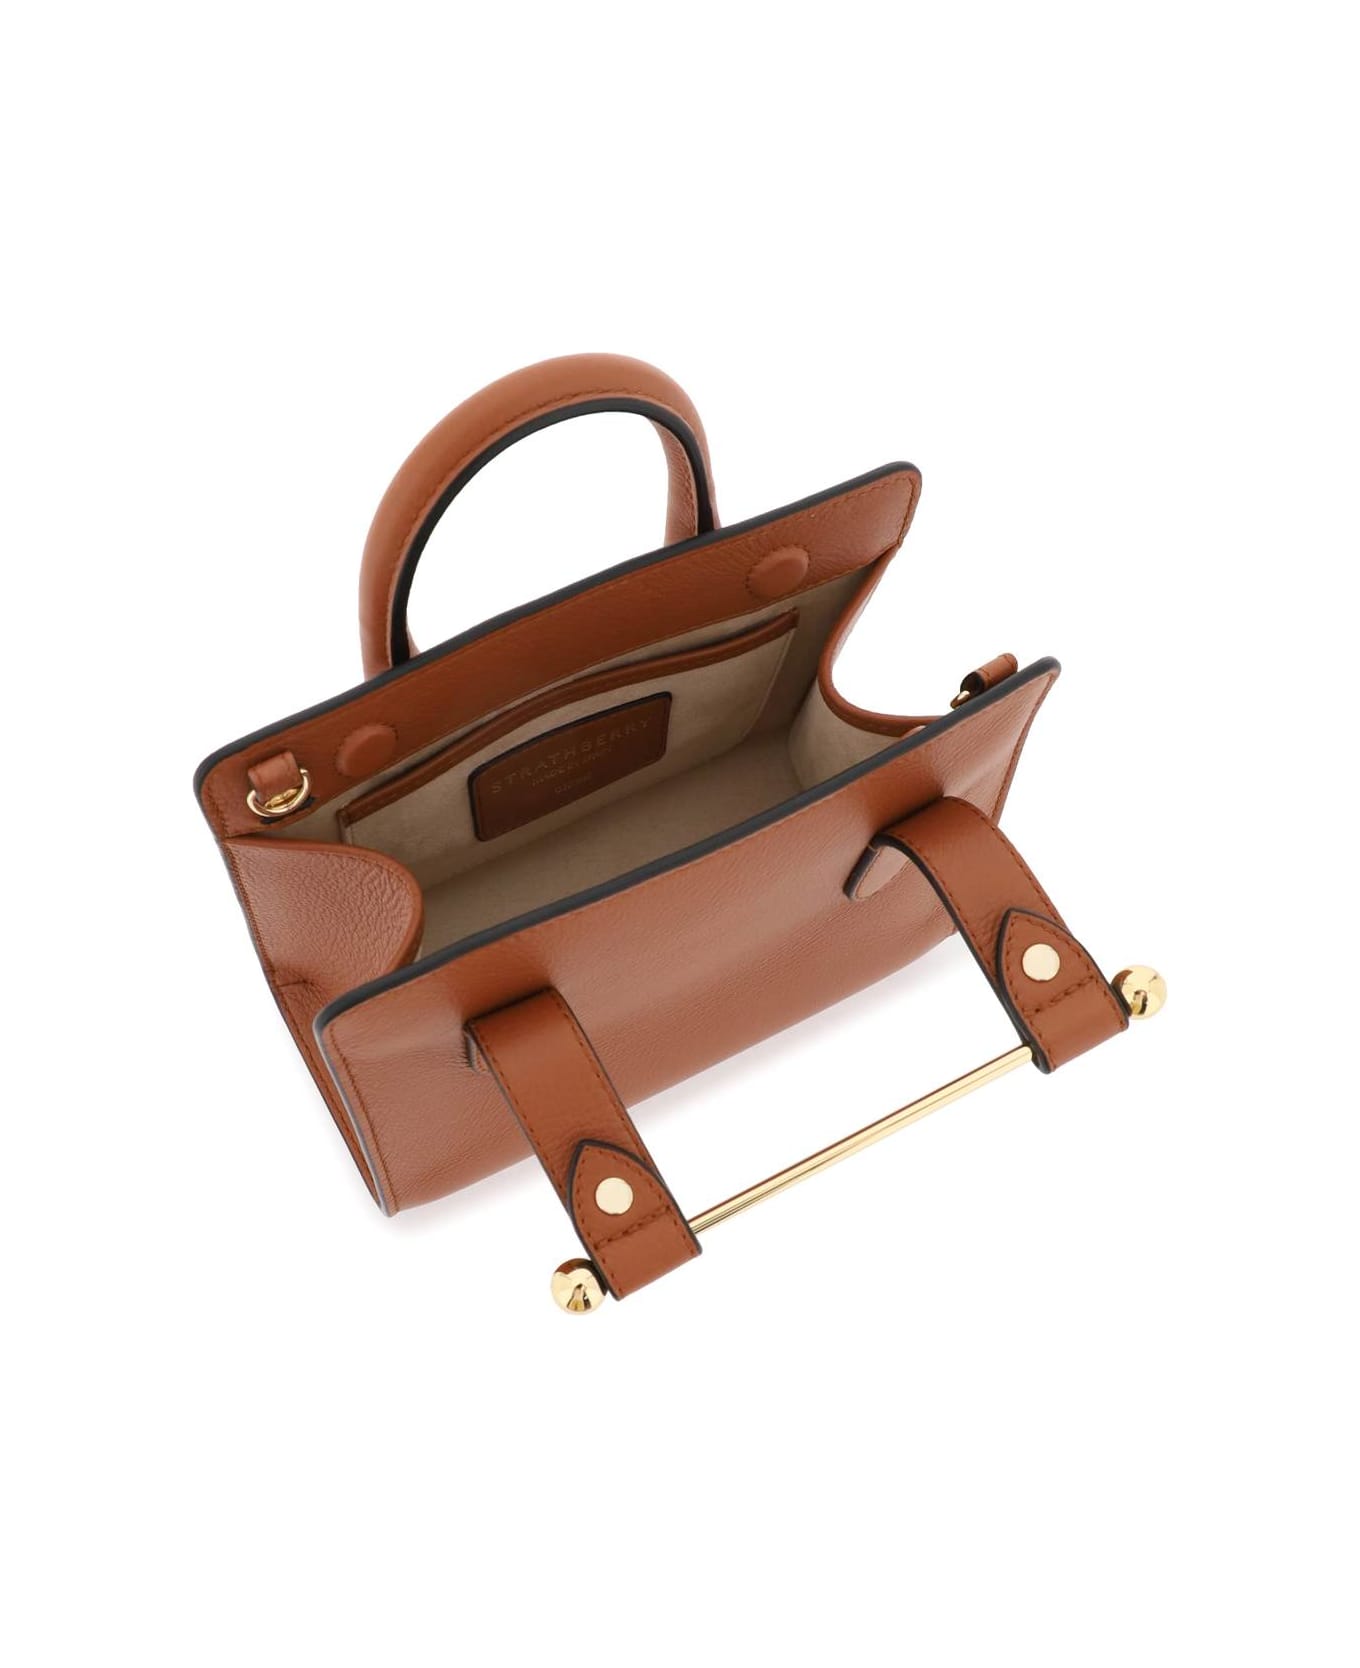 Strathberry Nano Tote Leather Bag - CHESTNUT (Brown)